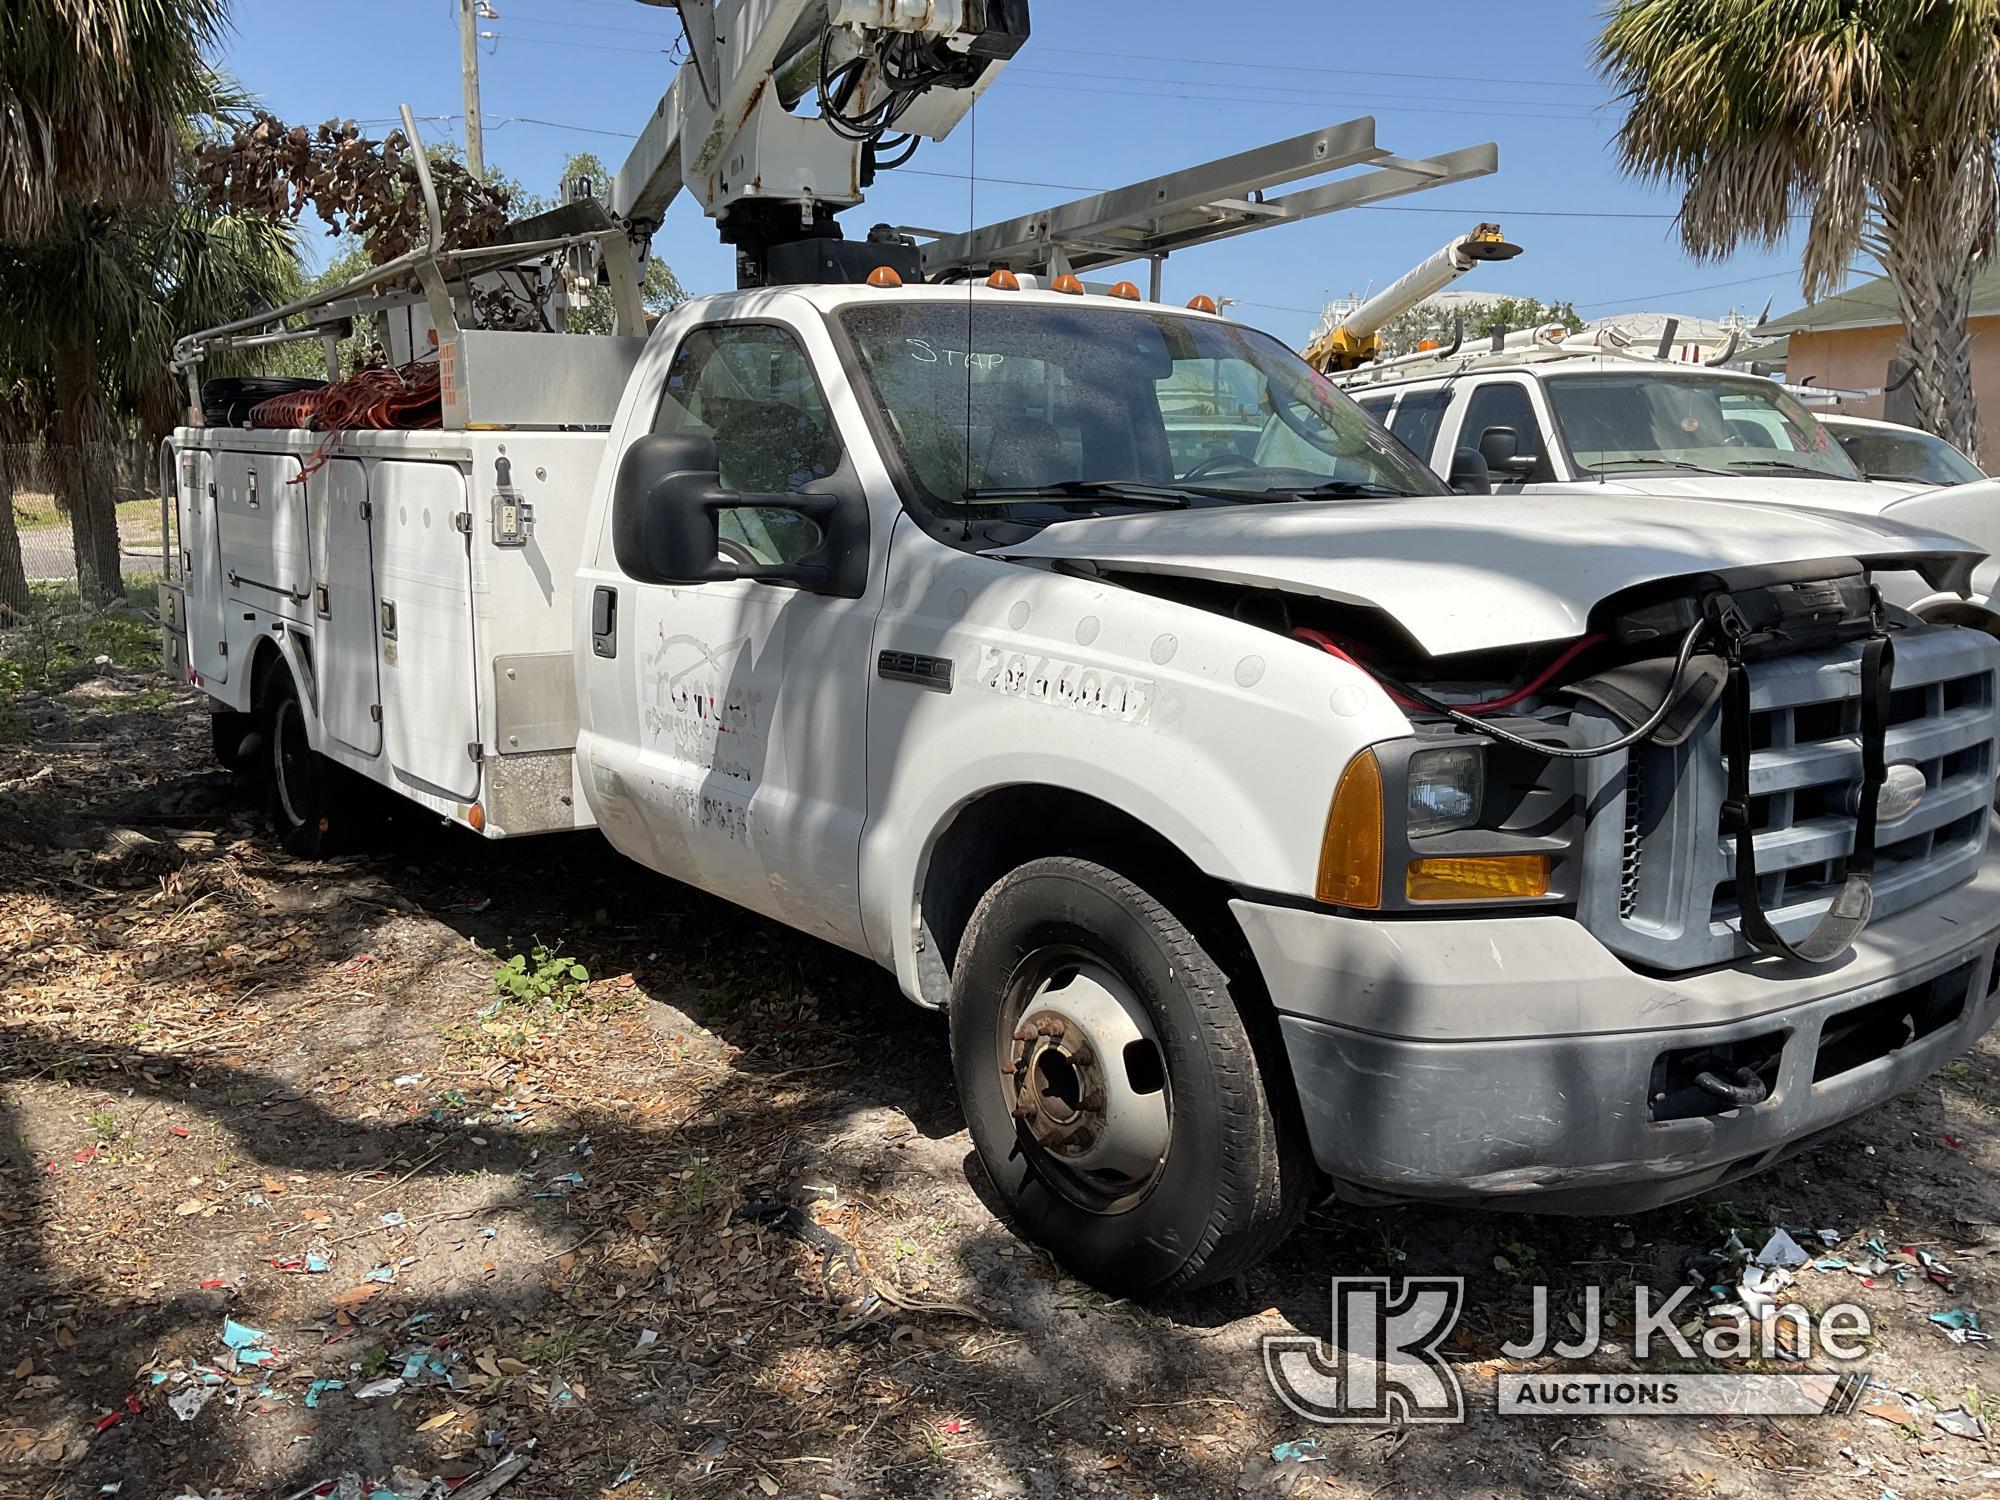 (Tampa, FL) Altec AT200-A, Telescopic Non-Insulated Bucket Truck mounted behind cab on 2006 Ford F35